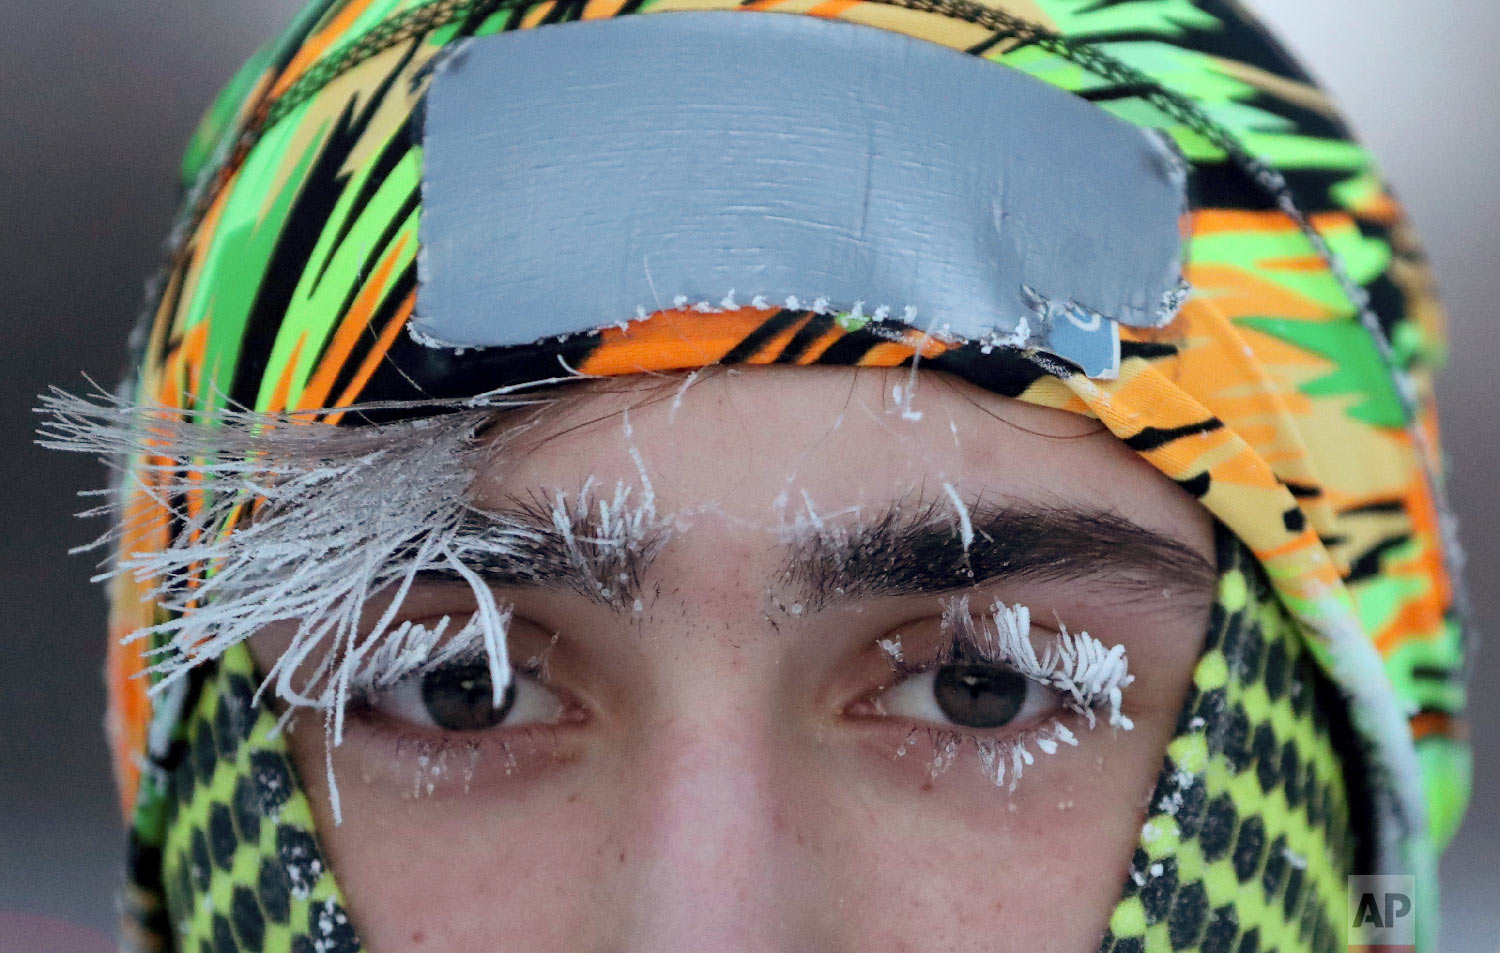  Frost covers part of the face of University of Minnesota student Daniel Dylla during a morning jog along Mississippi River Parkway Tuesday, Jan. 29, 2019, in Minneapolis. (David Joles/Star Tribune via AP) 